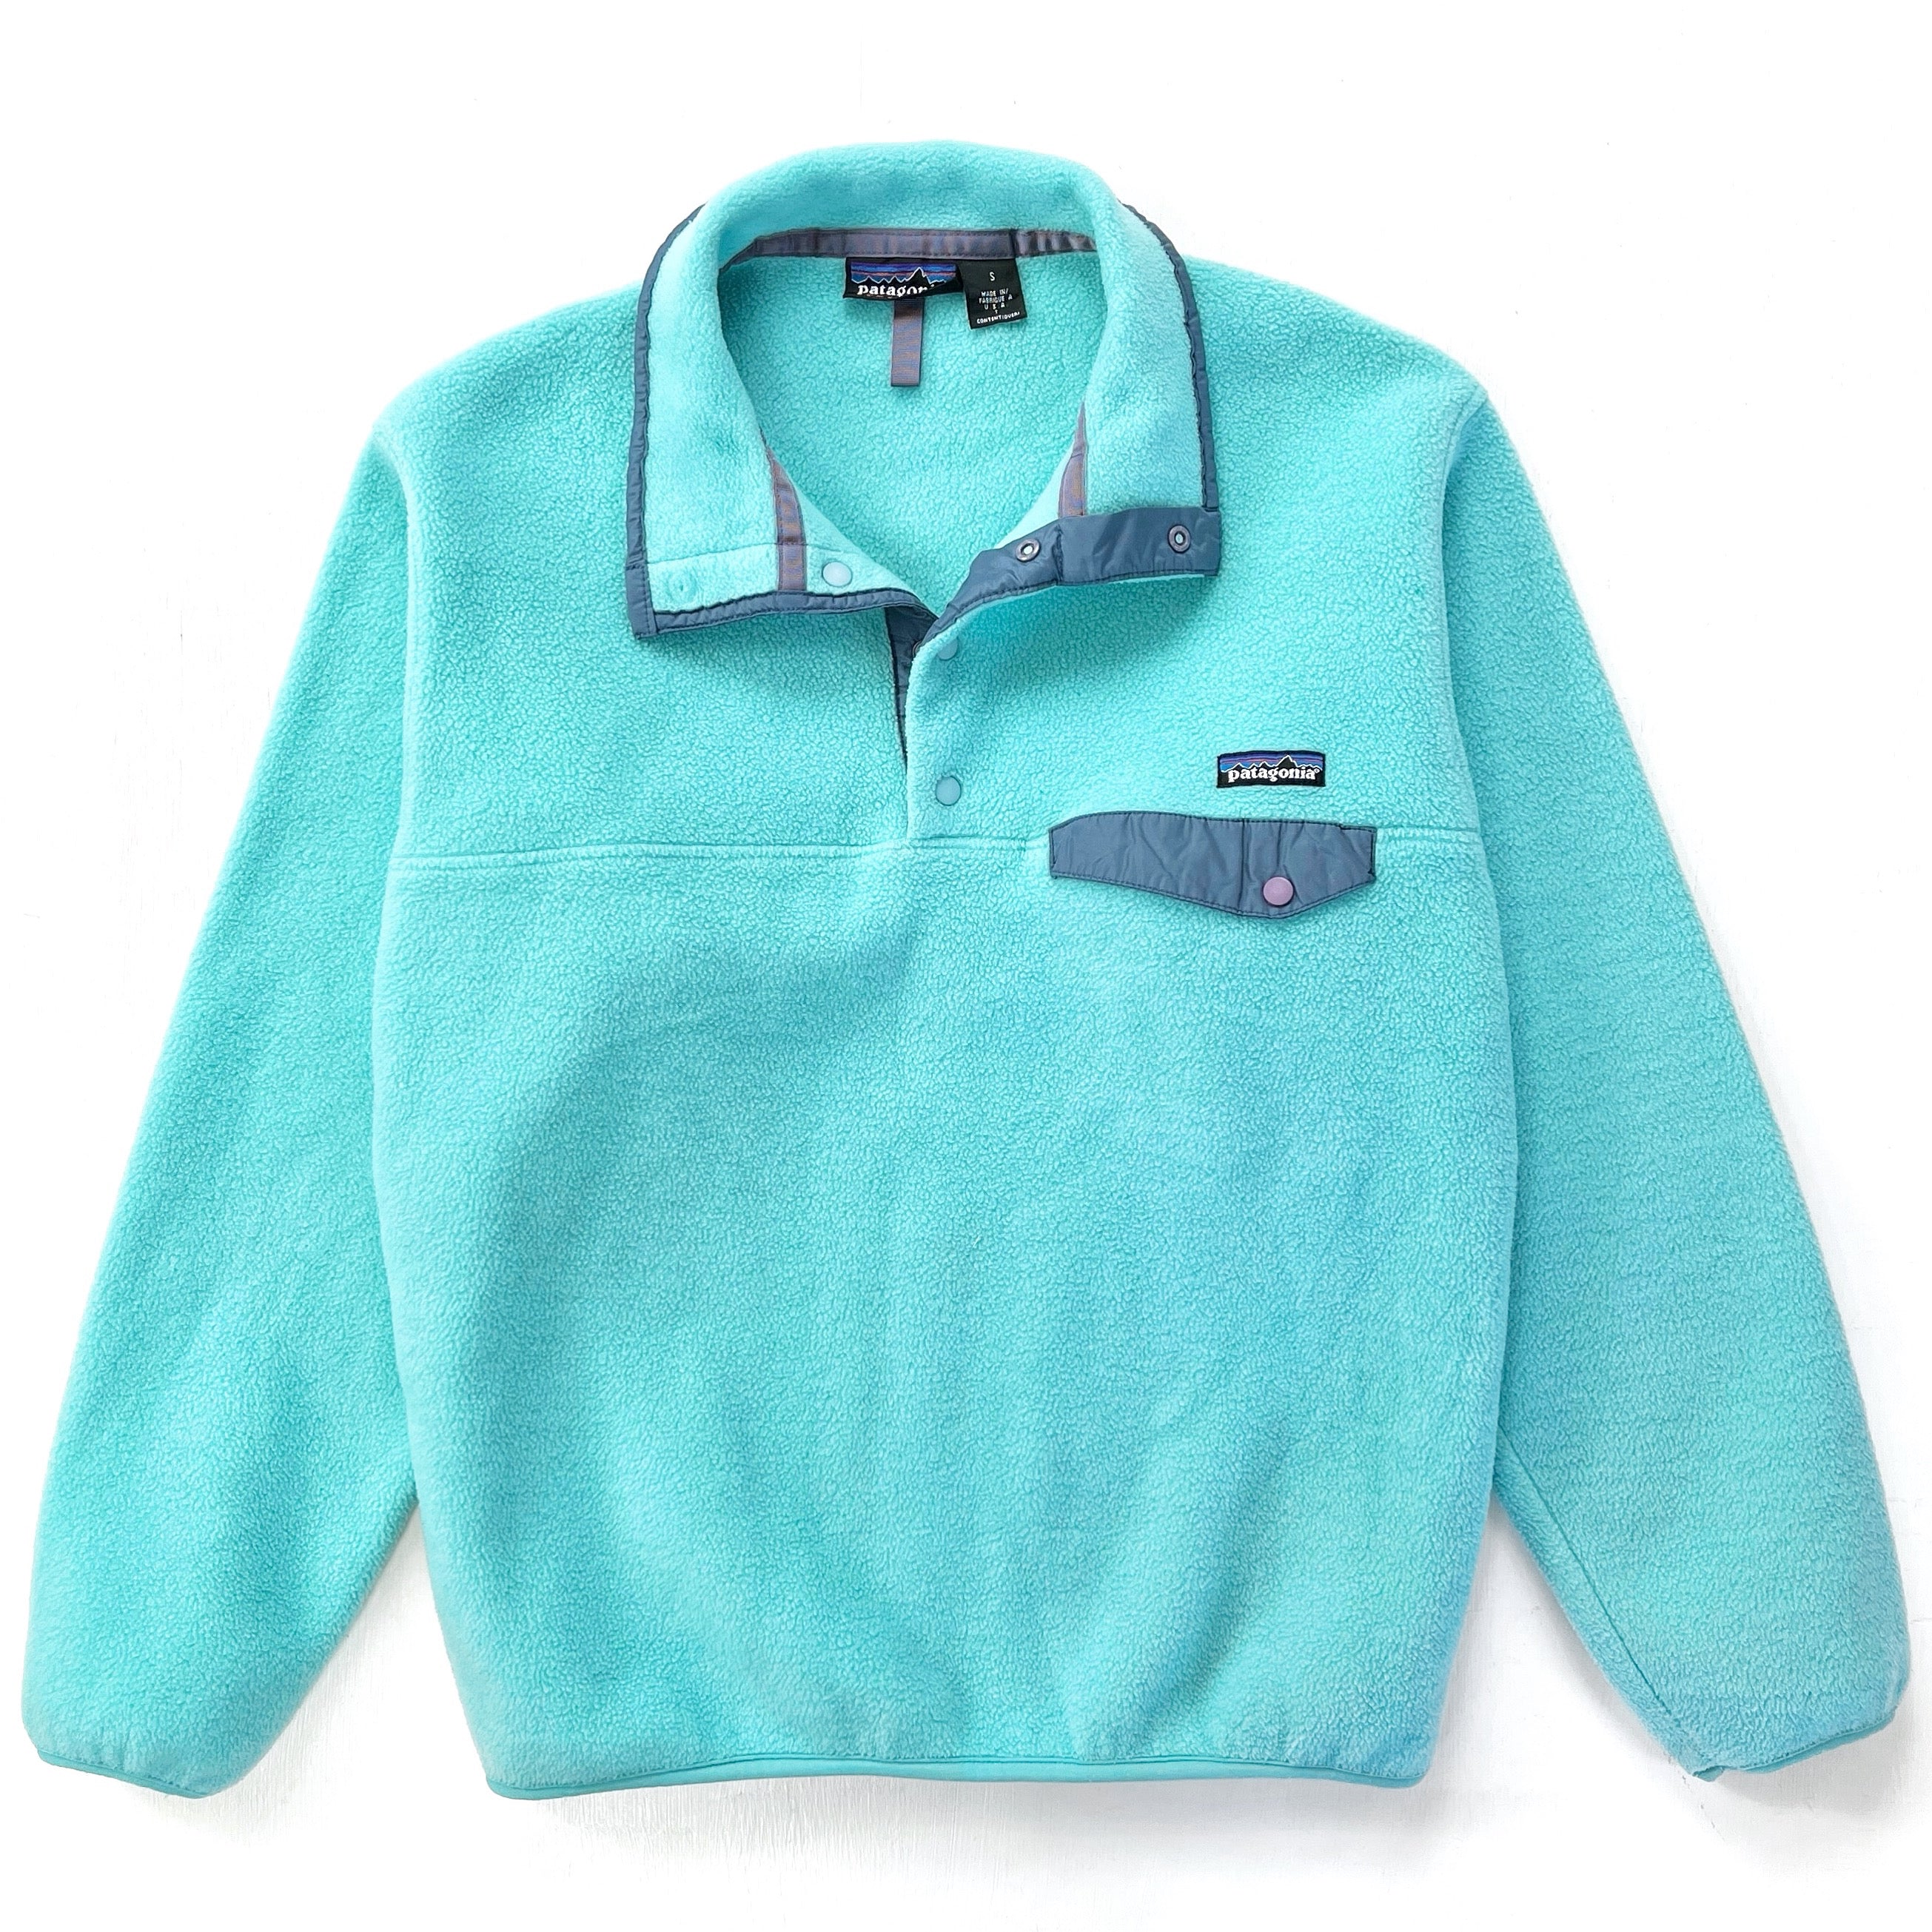 1997 Patagonia Made In The U.S.A. Synchilla Snap-T, Aqua (S)